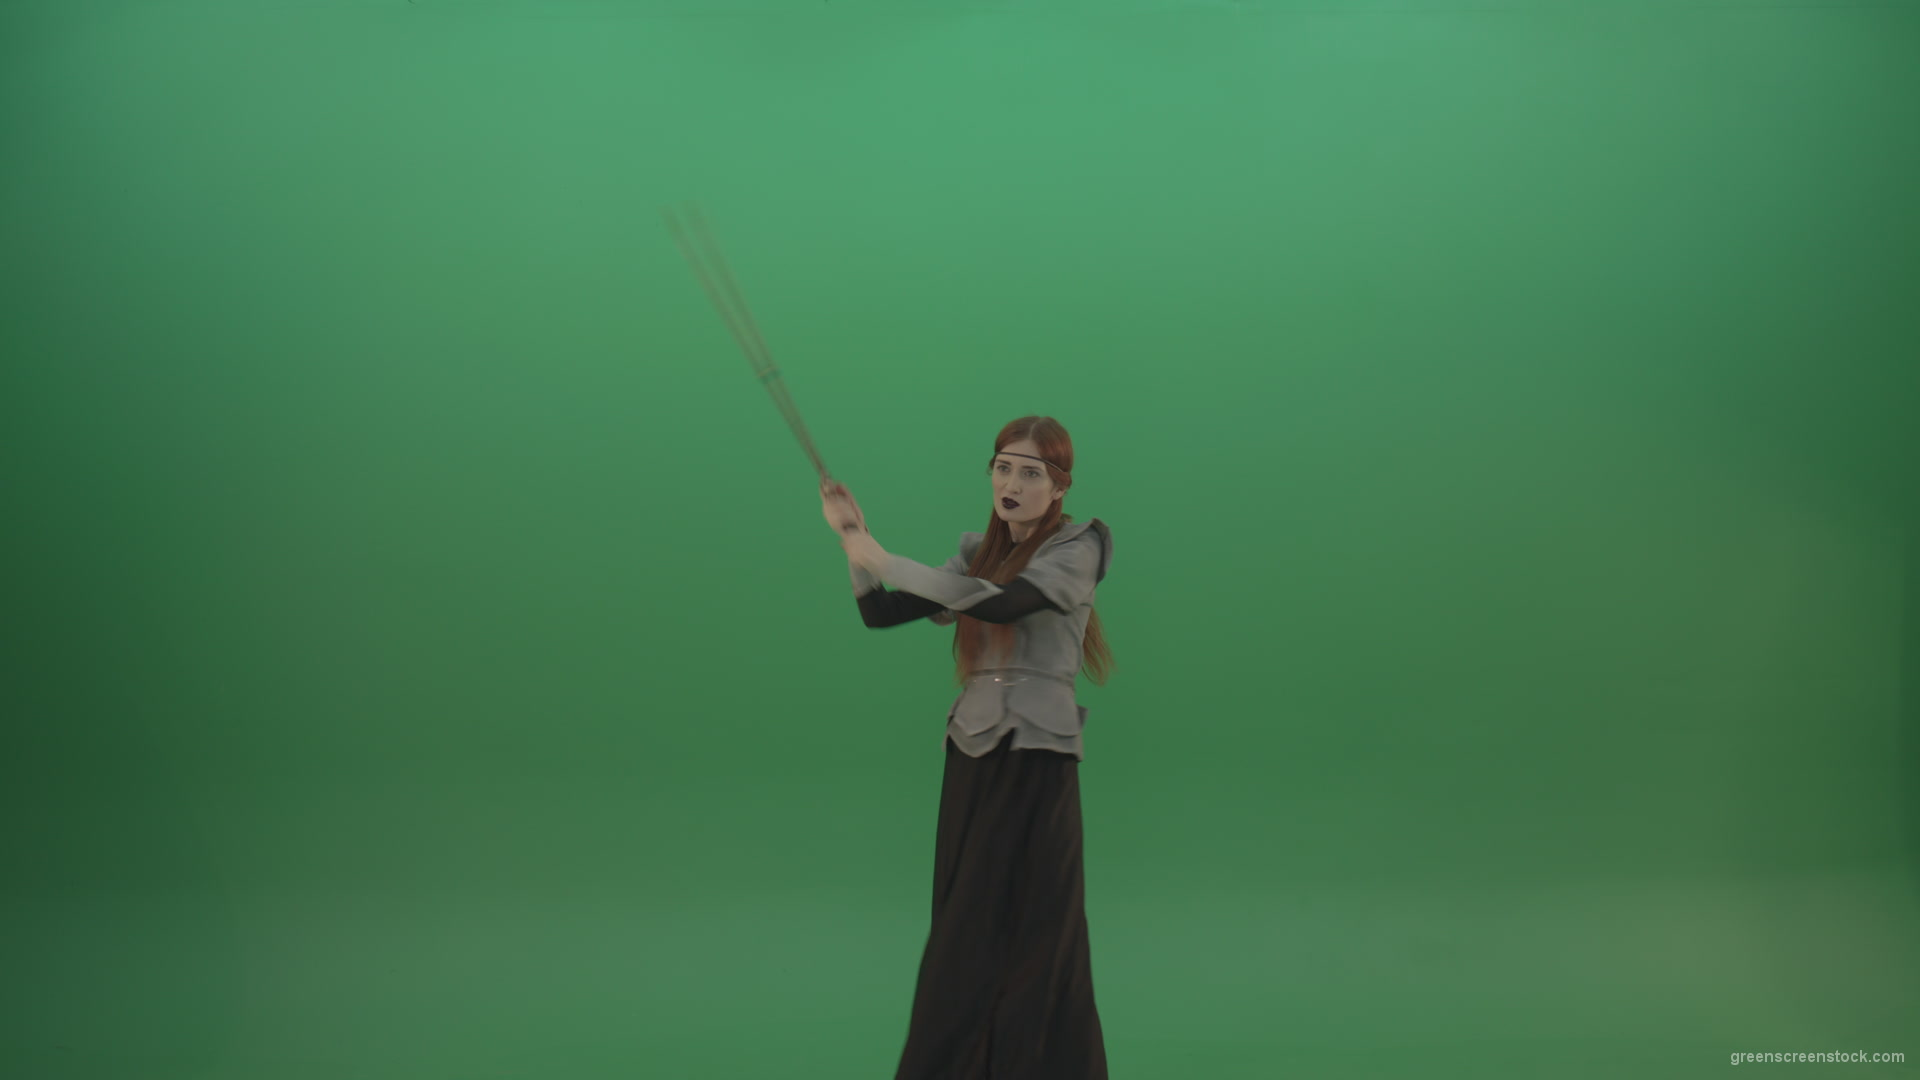 Fighting-girl-in-silver-armor-swinging-with-the-sword-aiming-at-one-goal-on-chromakey_006 Green Screen Stock